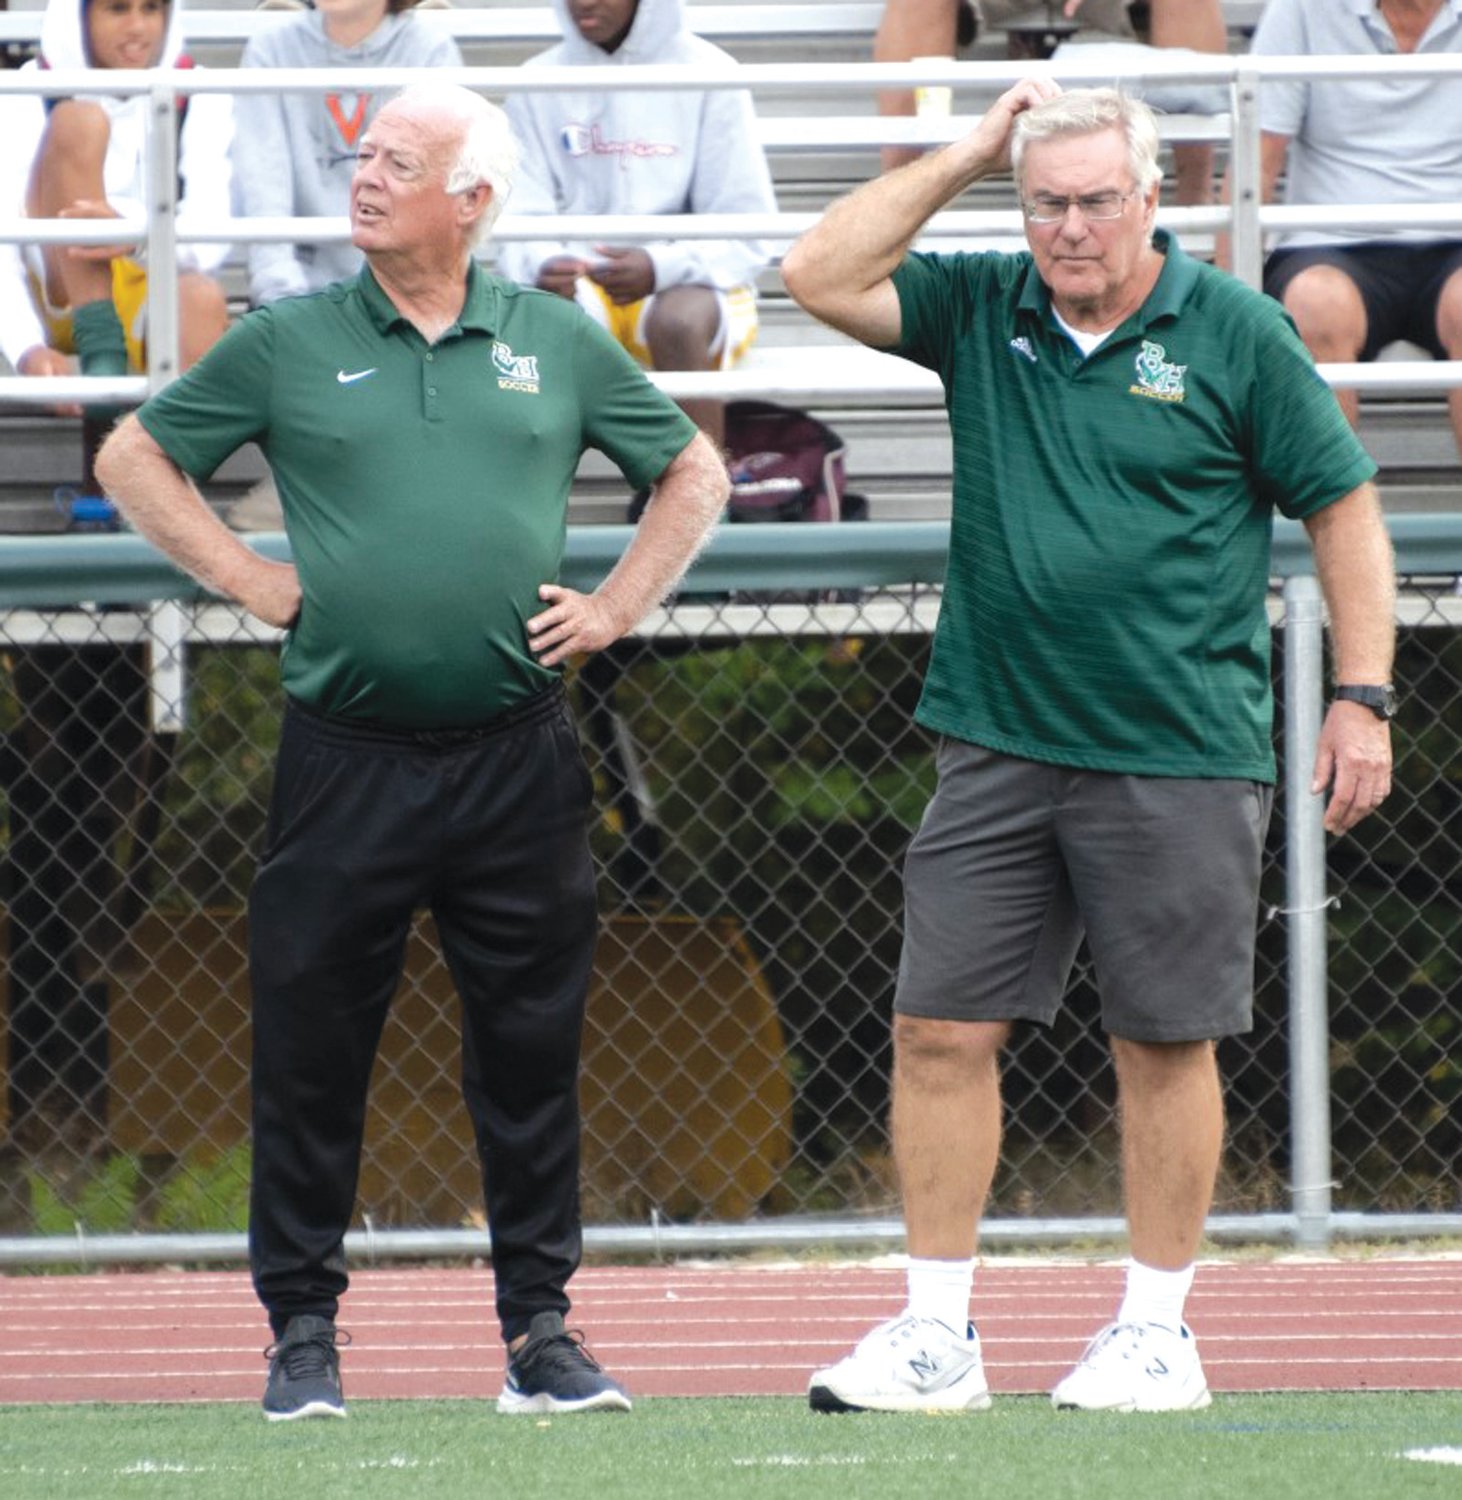 OWING IT TO THE GAME: Mick Rooney on the sideline at a Bishop Hendricken soccer game. Rooney is a former All-American and longtime coach. (Photo courtesy of Hendricken)